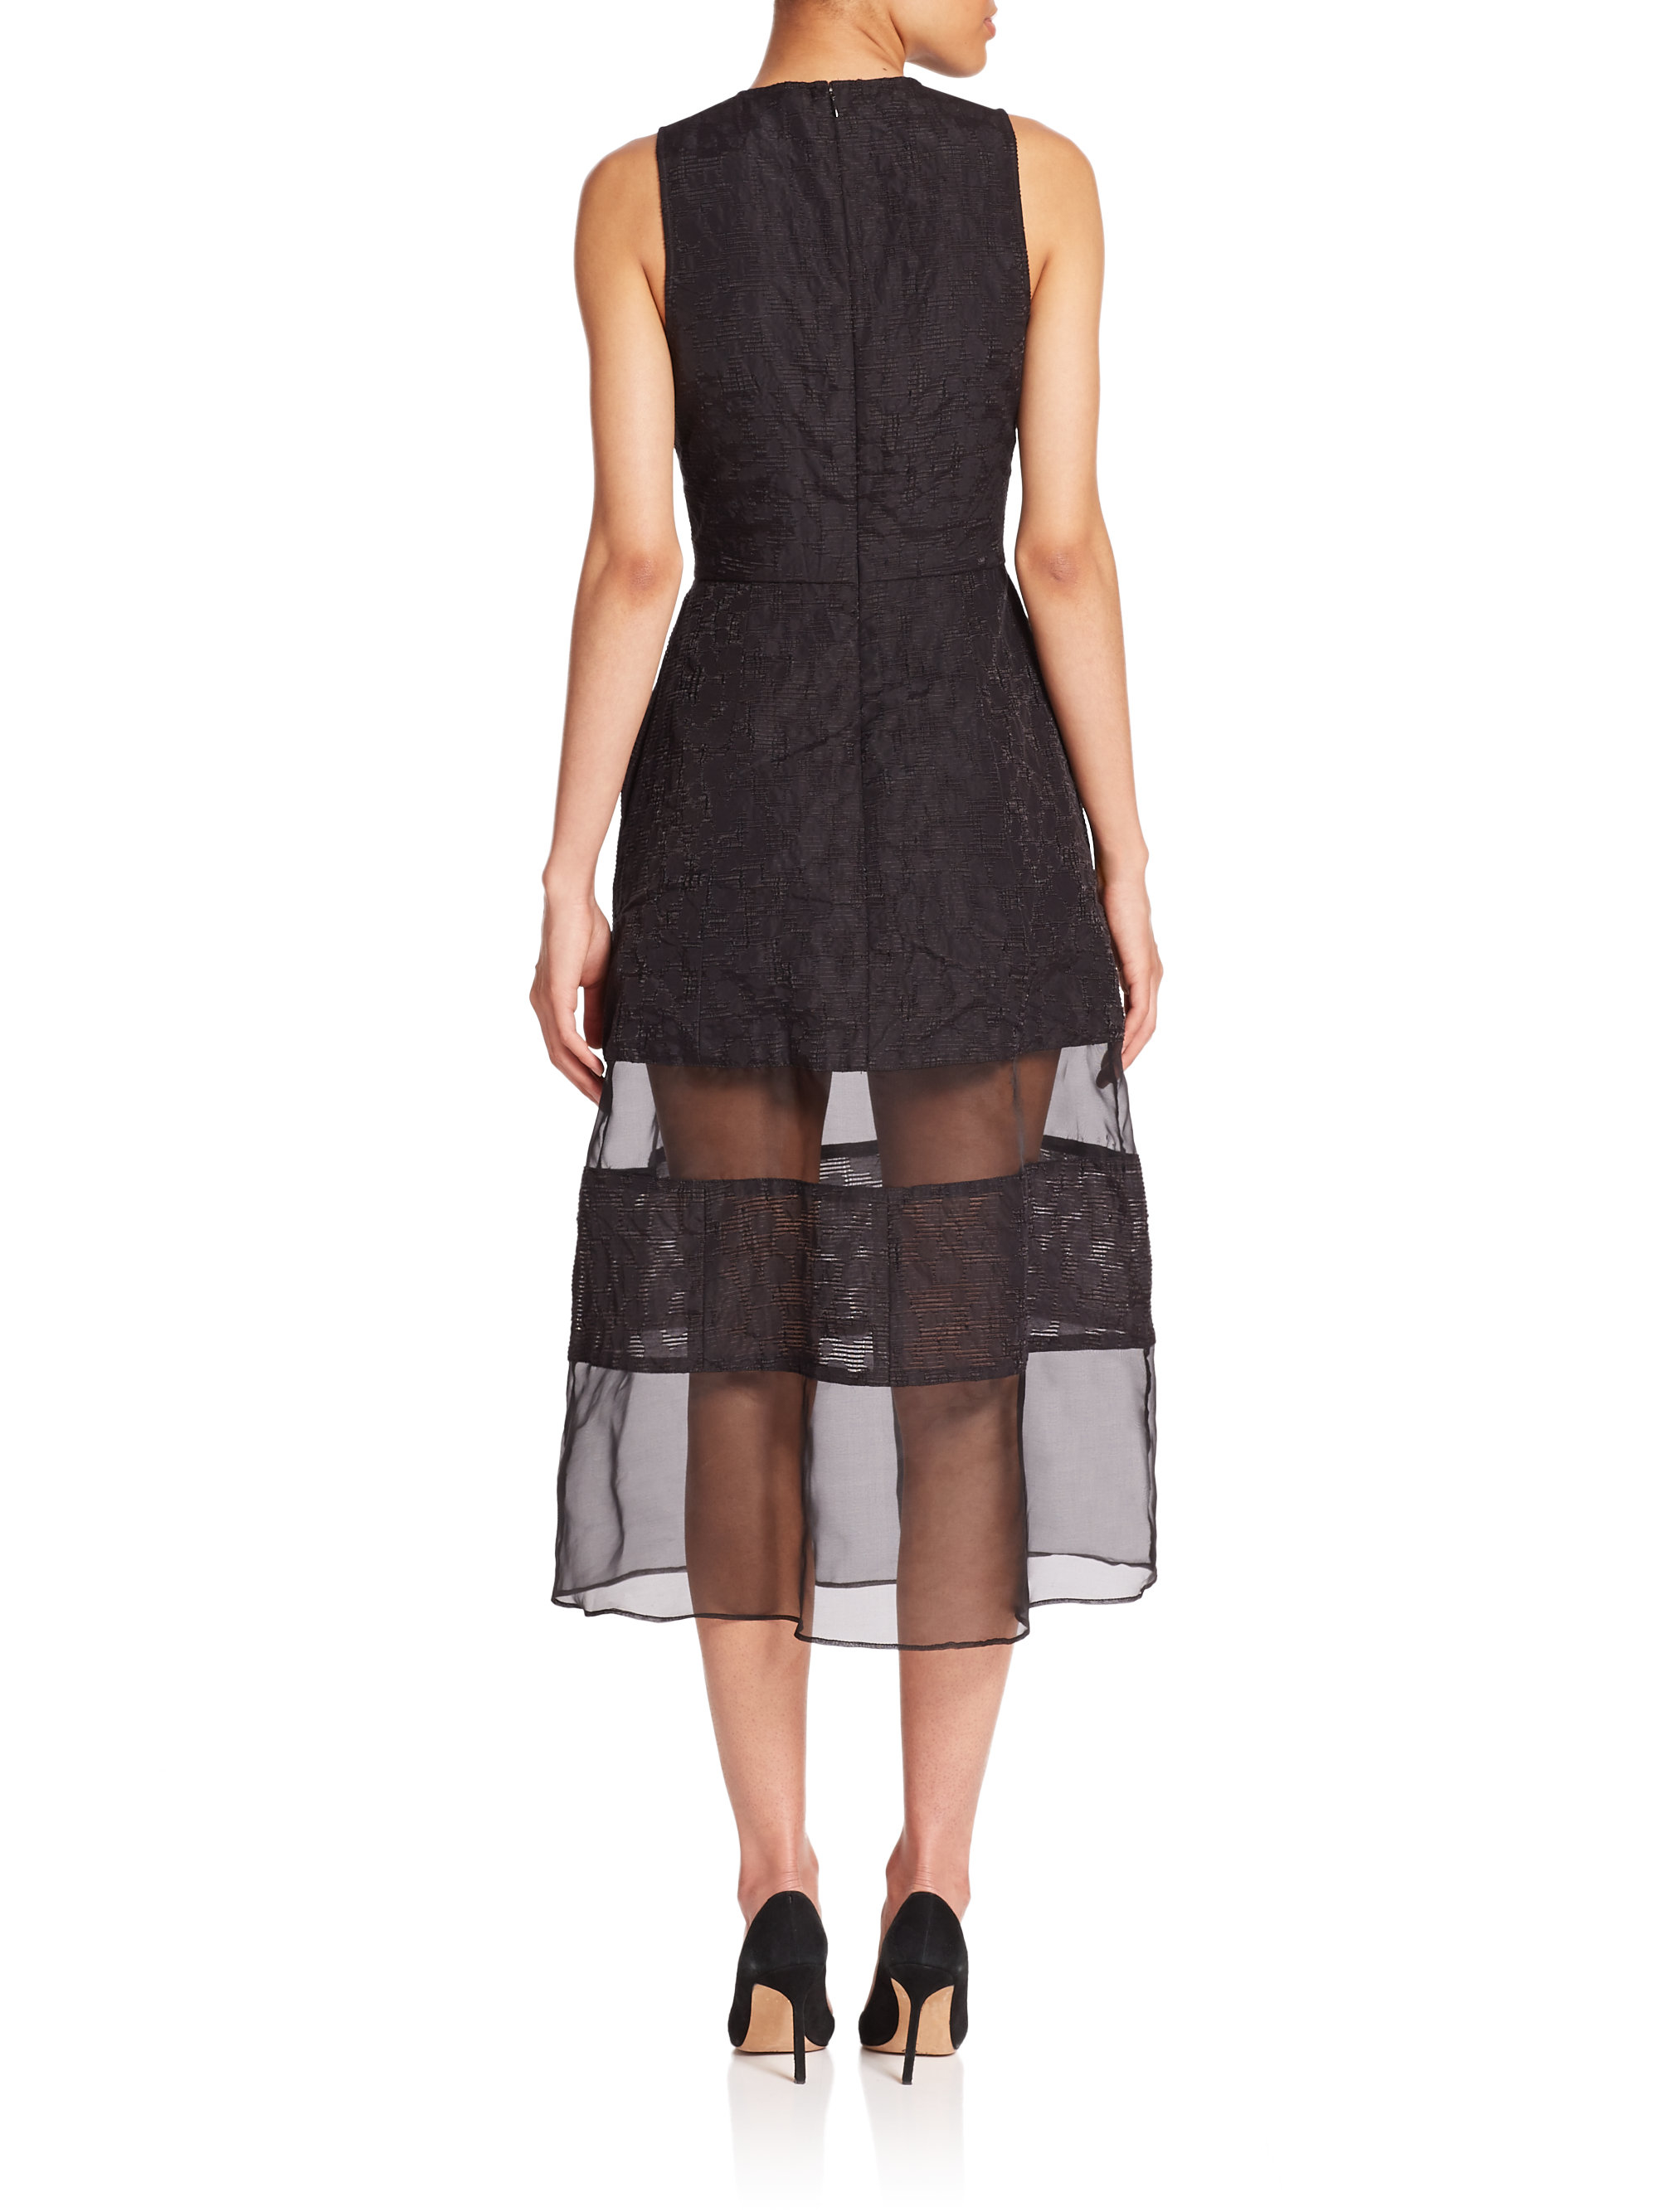 Lyst - Timo weiland Tennessee Dress in Black